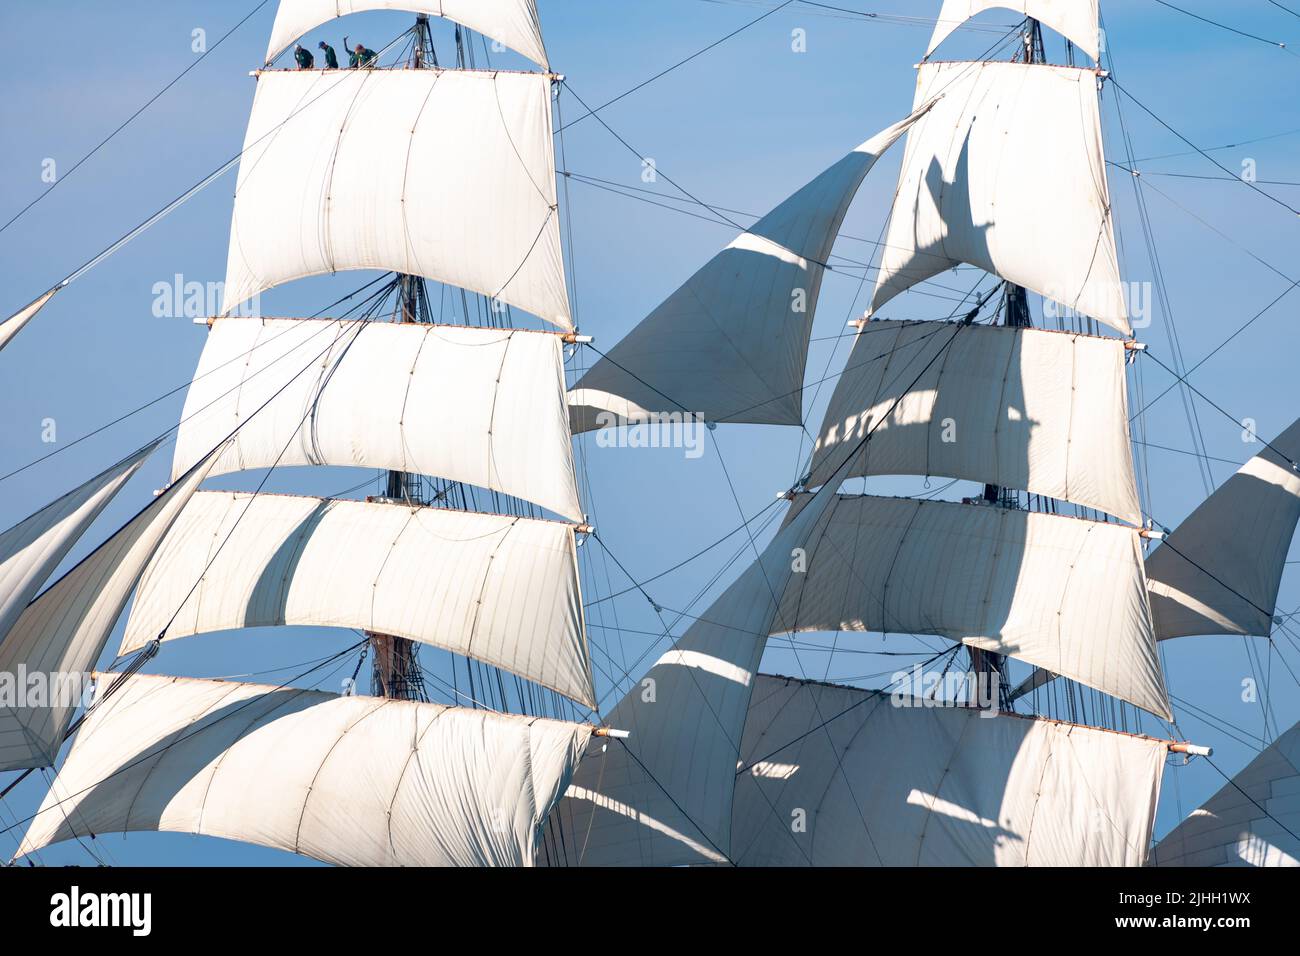 Fore and main mast of 1863 barque (world's oldest active sailing ship) flying all sails during anniversary sail in November 2018 off San Diego. Stock Photo